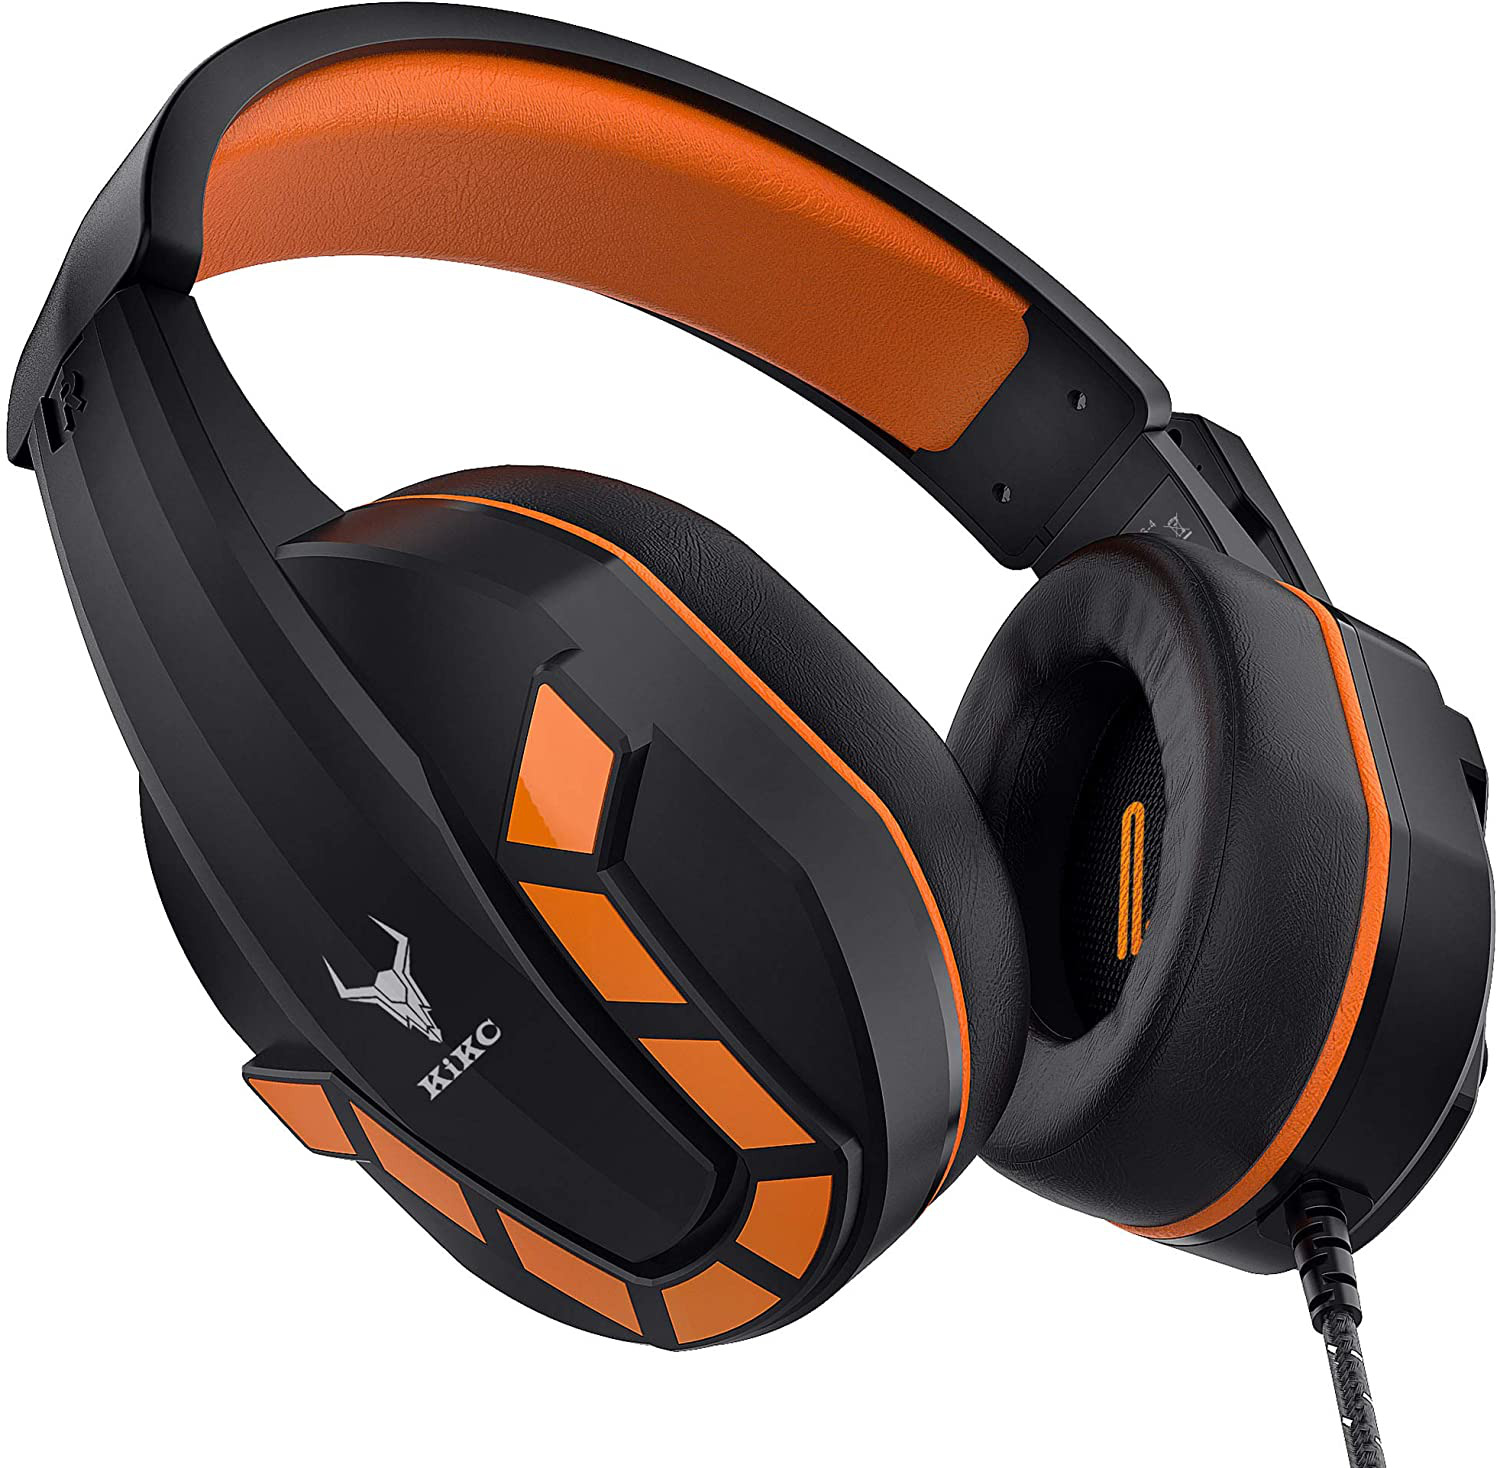 Cascos Gaming PS4 Audifonos Auriculares Gamer PC Xbox One Gamer Con Microfono